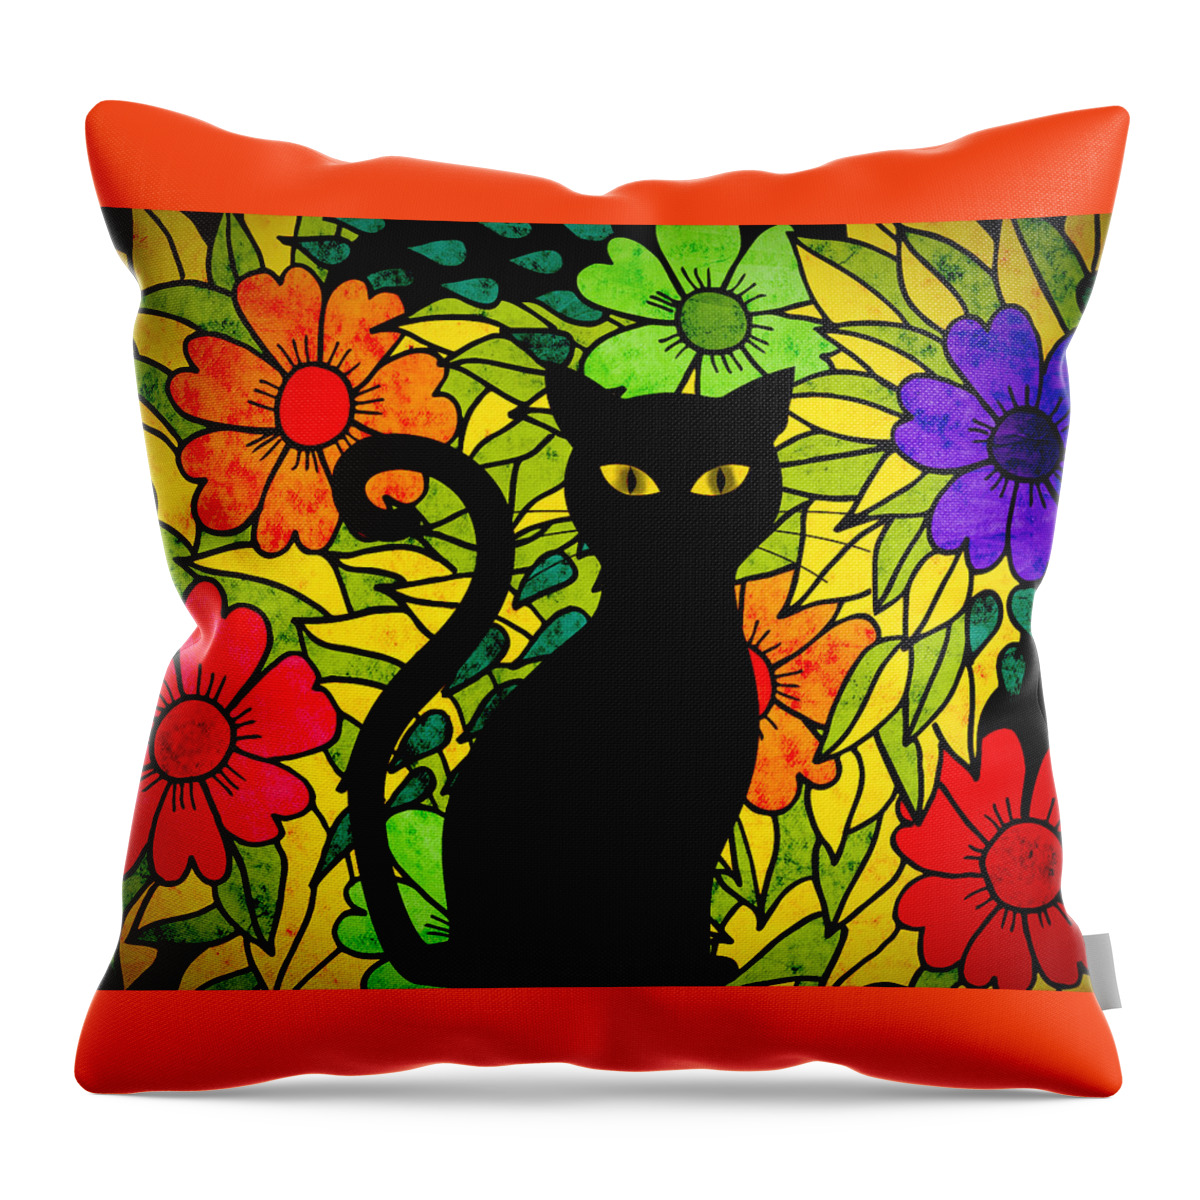 Groovy Cat Throw Pillow featuring the mixed media Groovy Cat by Ally White